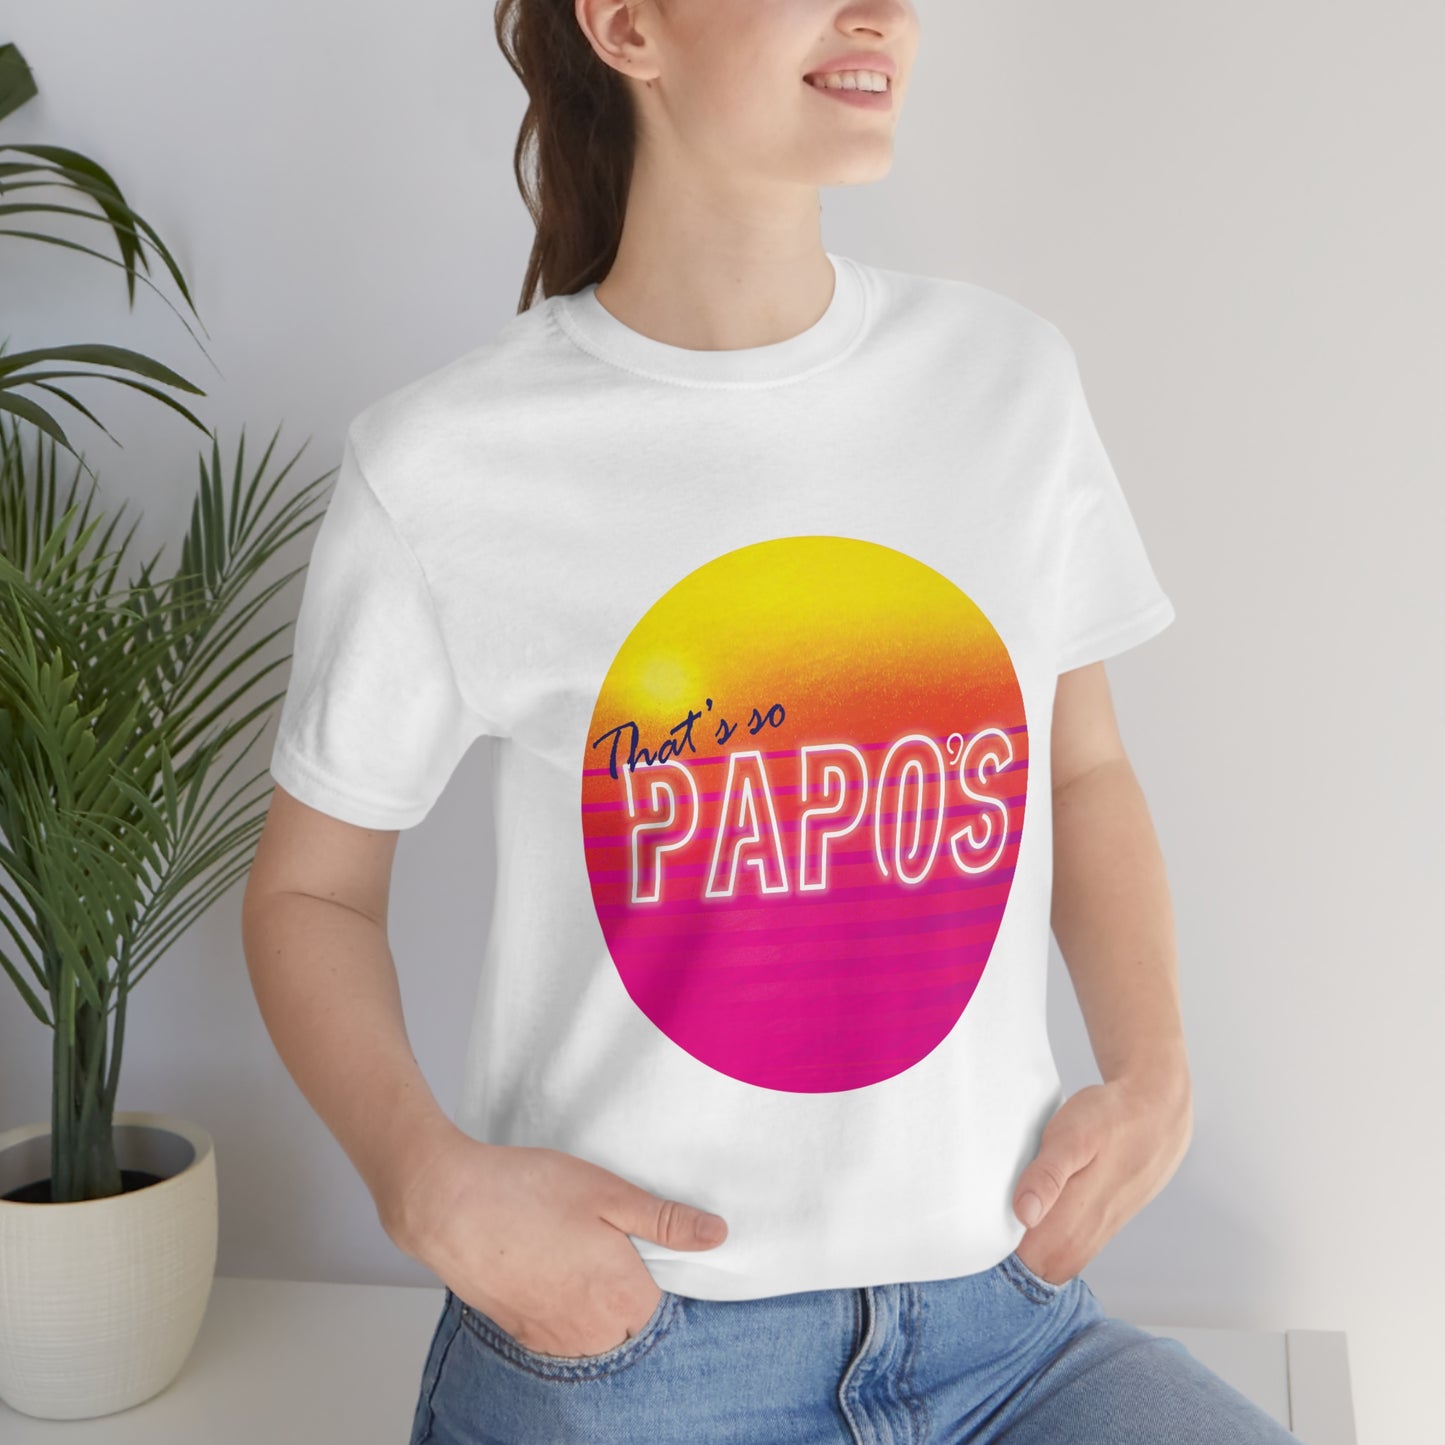 That's So PaPo's Front Logo Unisex Jersey Short Sleeve Tee